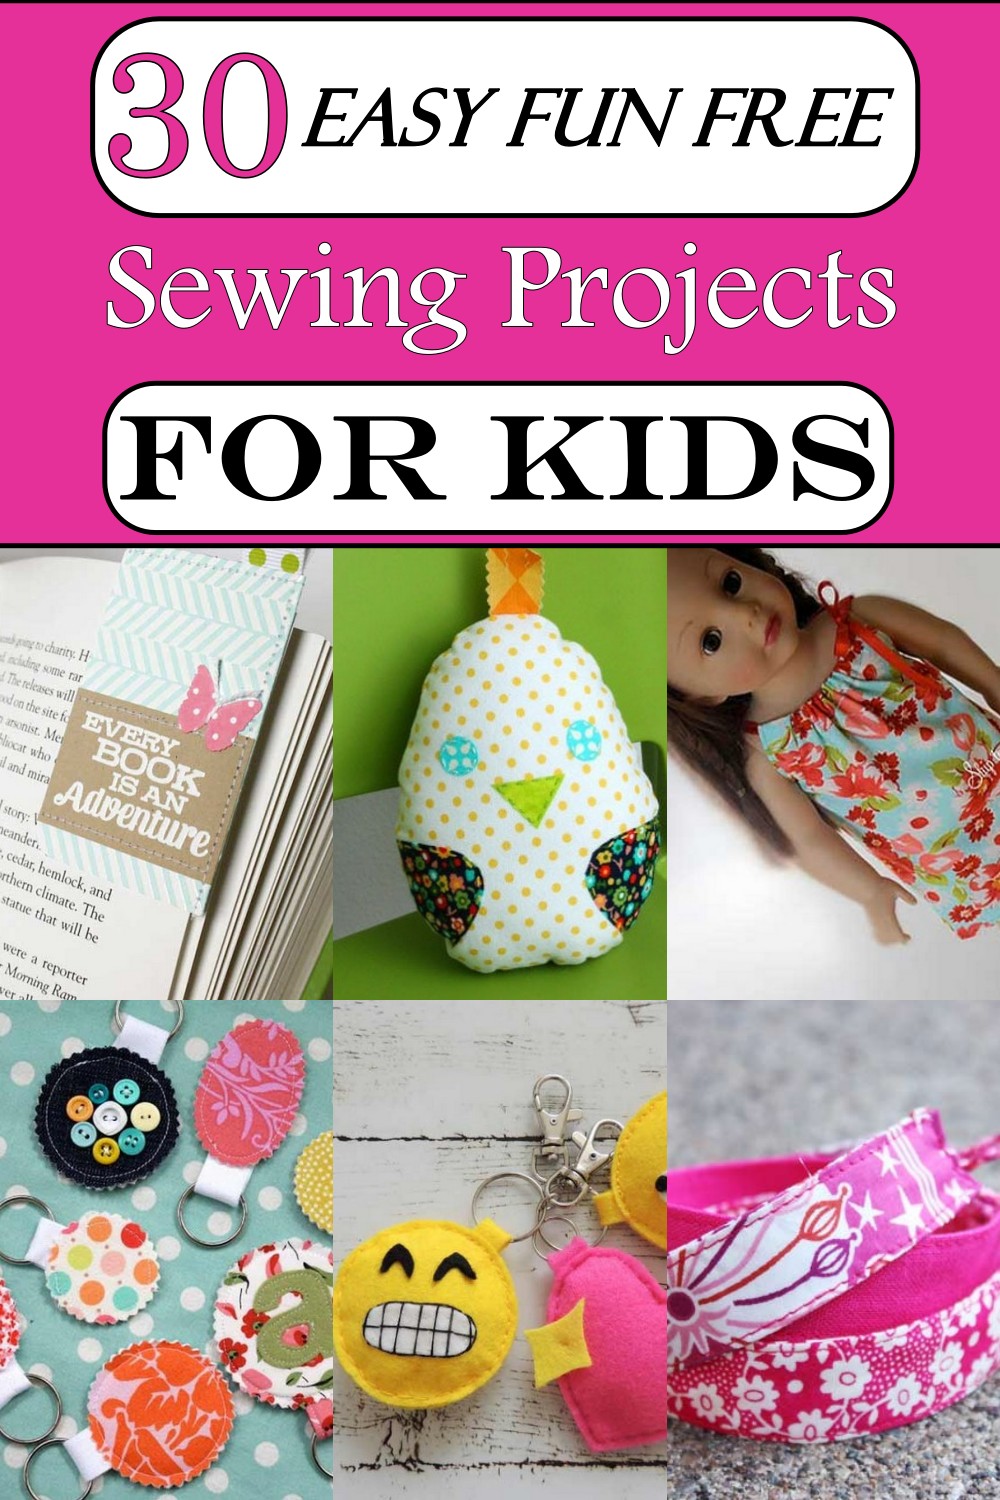 Easy Fun Free Sewing Projects For Kids